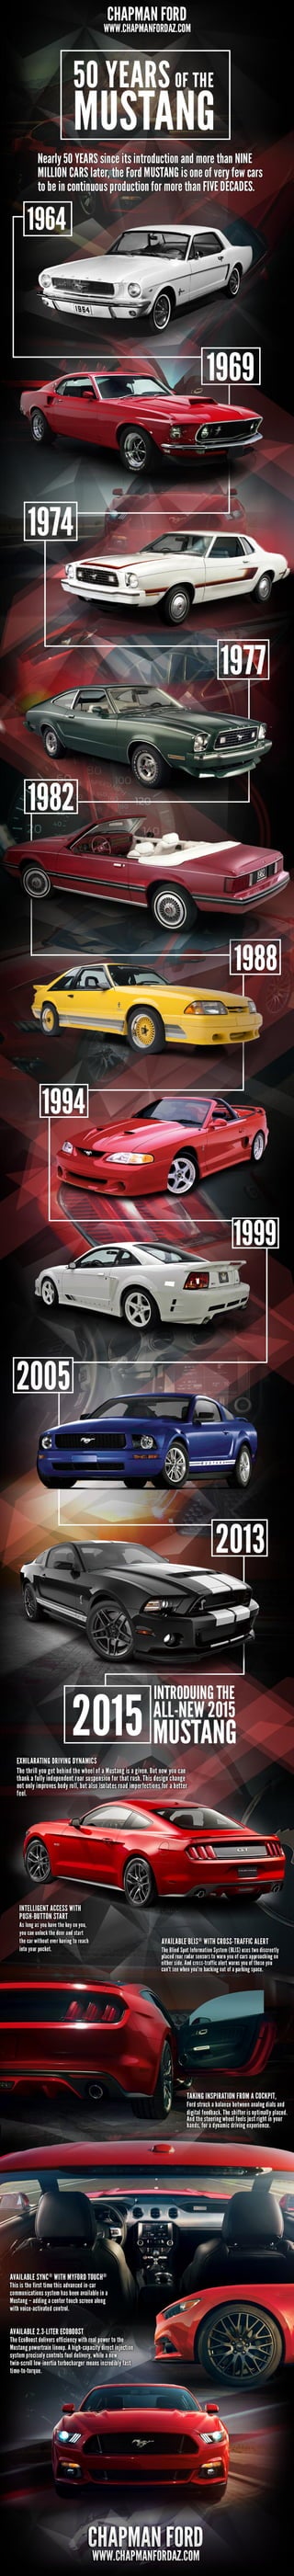 50 Years of the Ford Mustang